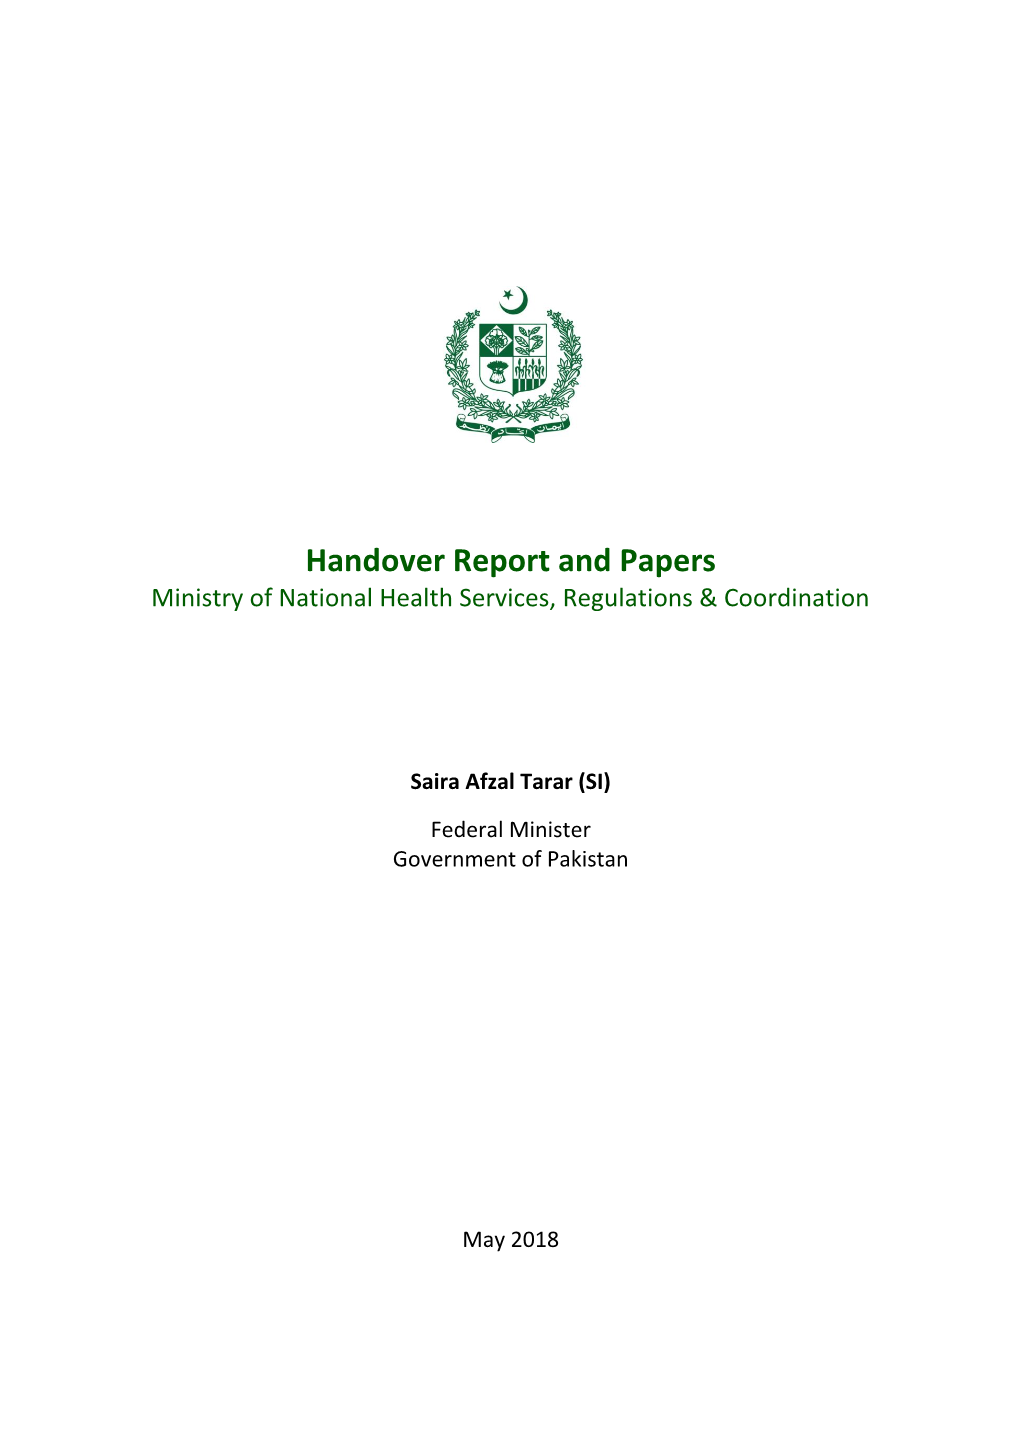 Handover Report and Papers Federal Minister Monhsrc 2018.Pdf